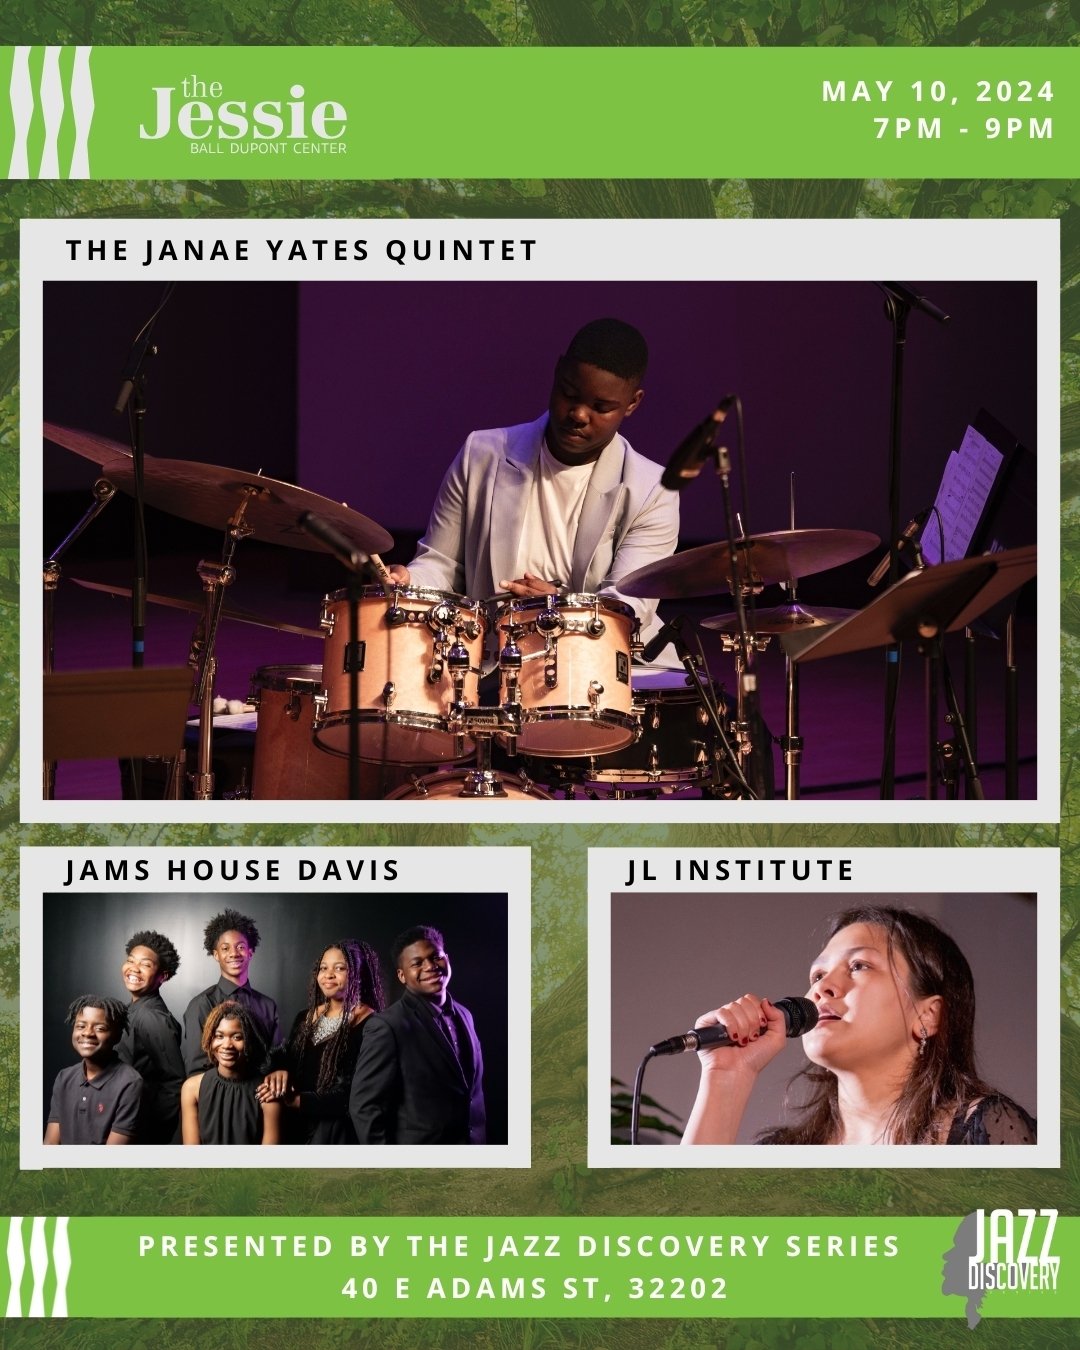 The countdown begins! Only TWO days left until a mesmerizing night with the Janae Yate Quintet at The Jessie. Witness the incredible talents of a percussion prodigy live in concert! Reminder: FREE tickets are available - secure yours now by clicking 